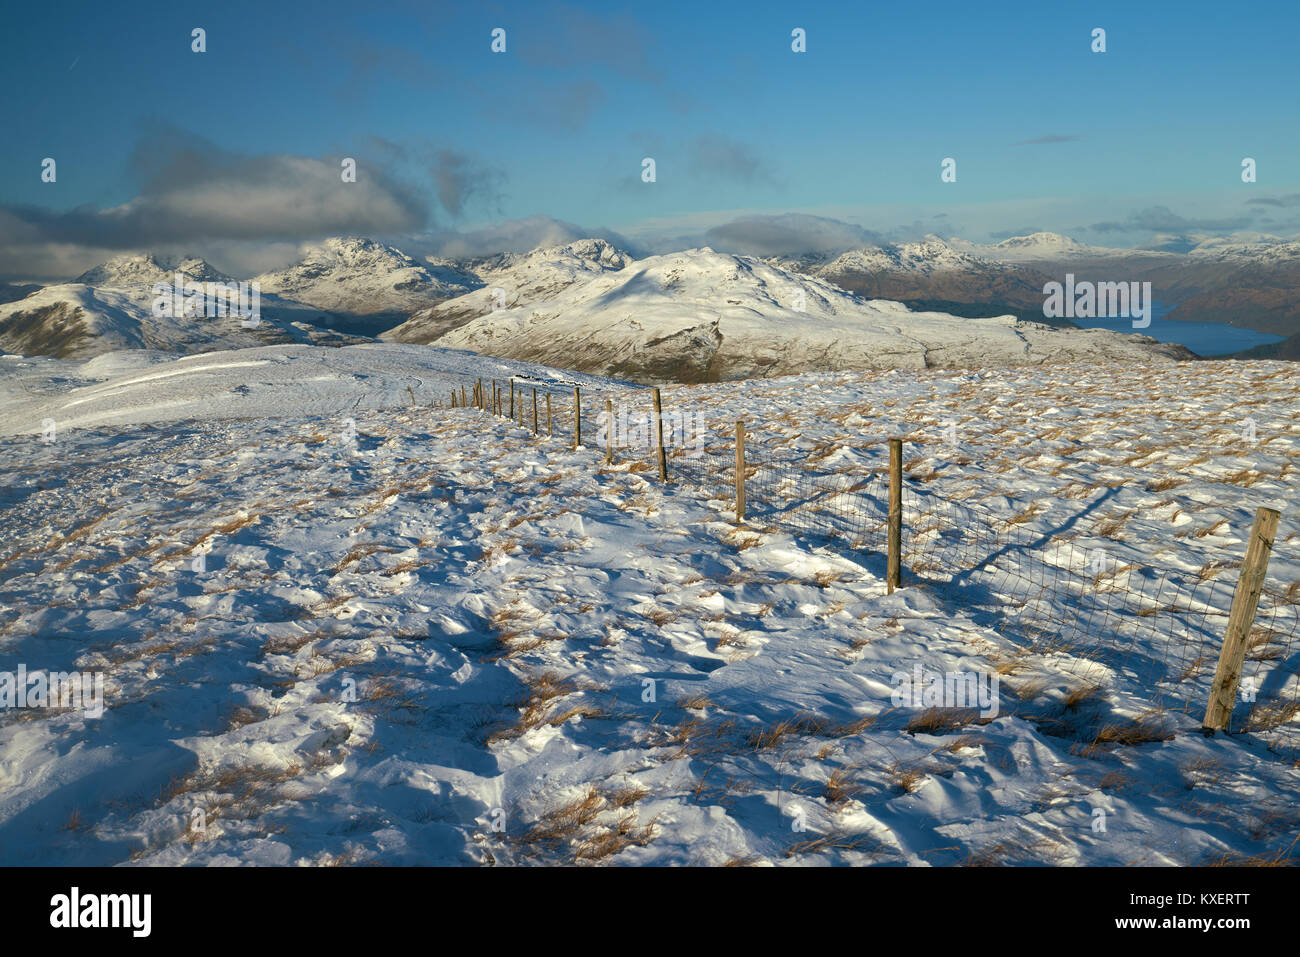 Snowy winter view from the summit of Beinn Dubh with Loch Lomond and the Arrochar Alps in the background. Scotland, UK. Stock Photo